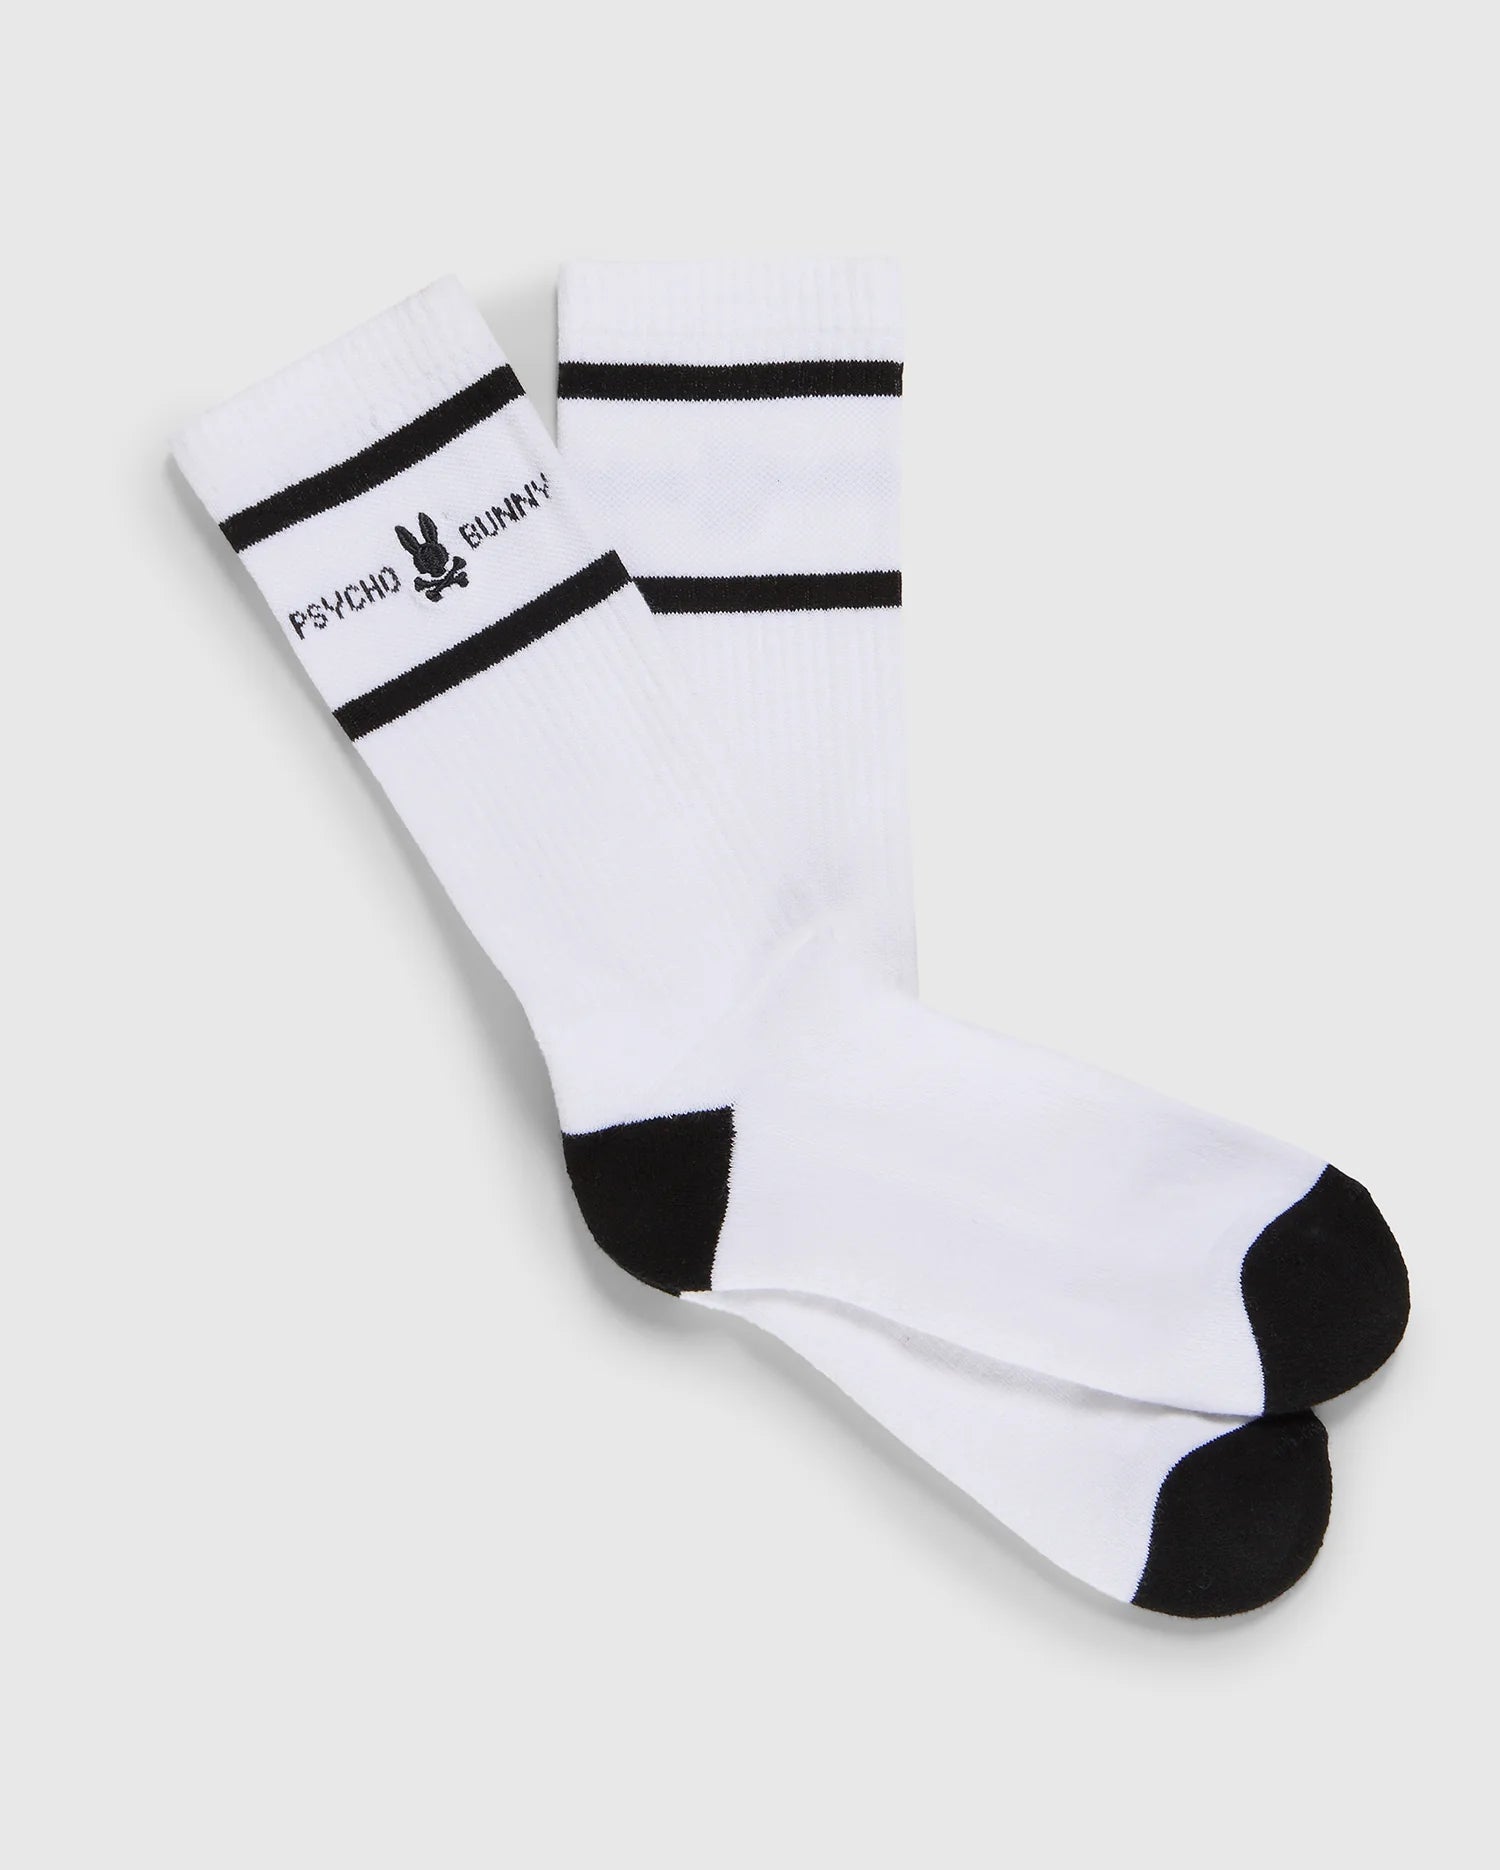 A pair of MENS FASHION SOCKS - B6F484B200 made from luxurious Pima cotton, featuring white with black toe and heel sections, two black horizontal stripes near the top, and a black bunny logo with the text 